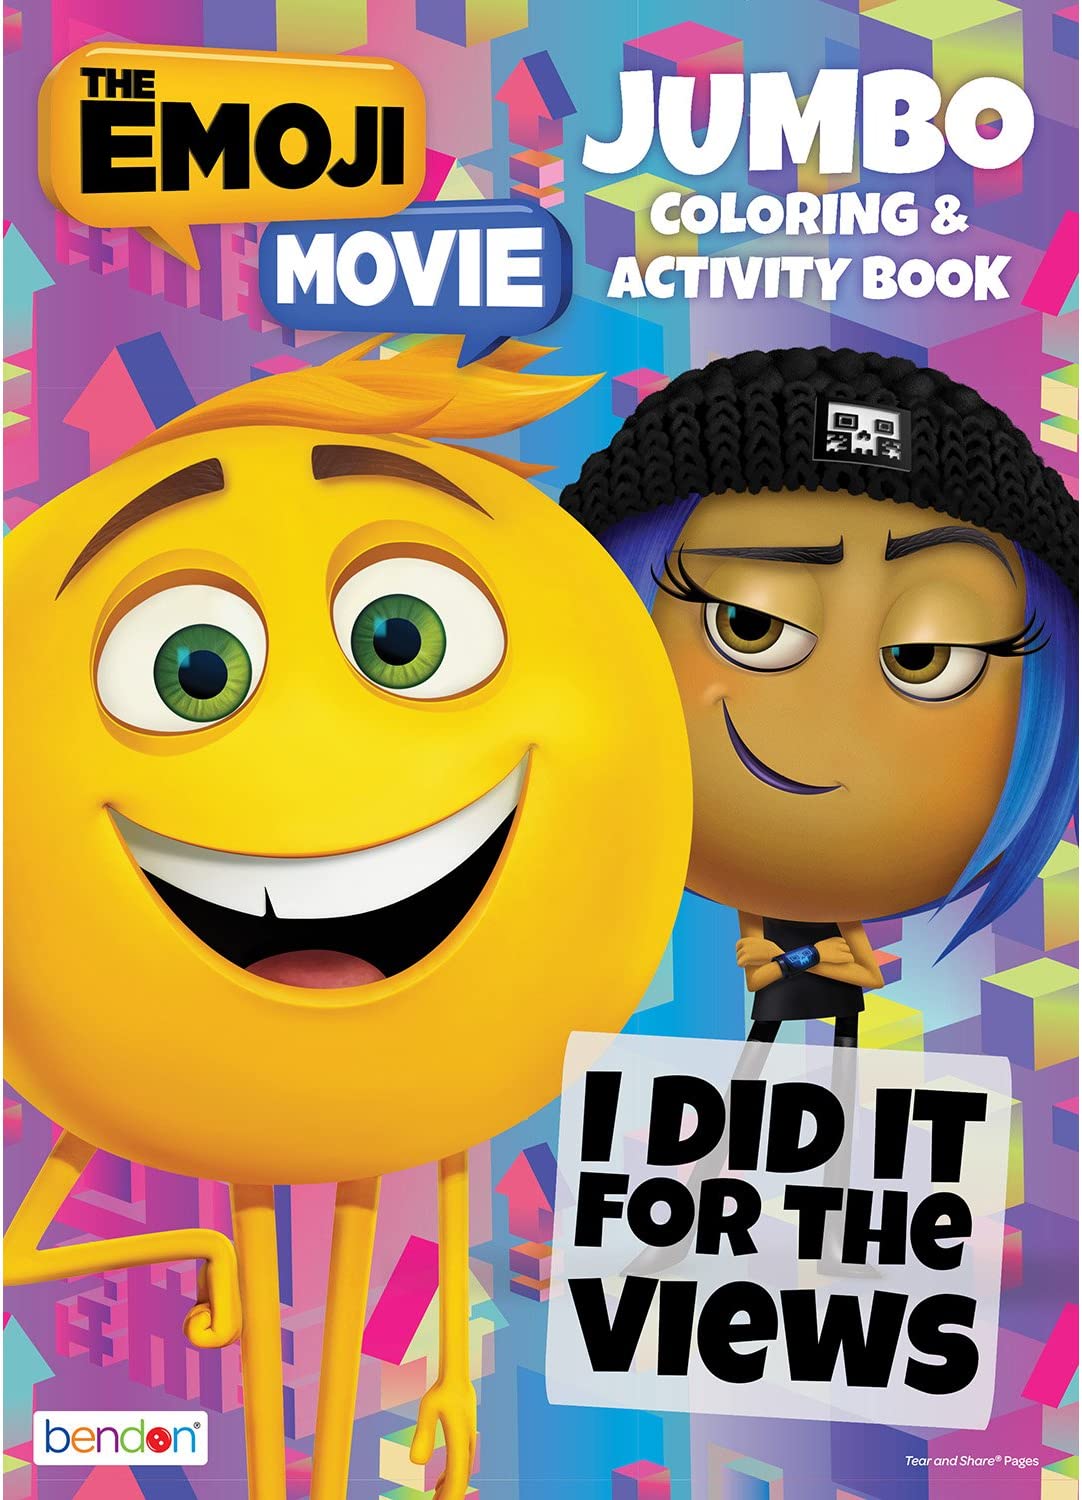 Bendon The Emoji Movie Jumbo Coloring and Activity Book, 64 Pages (40938) –  Undique Marketplace